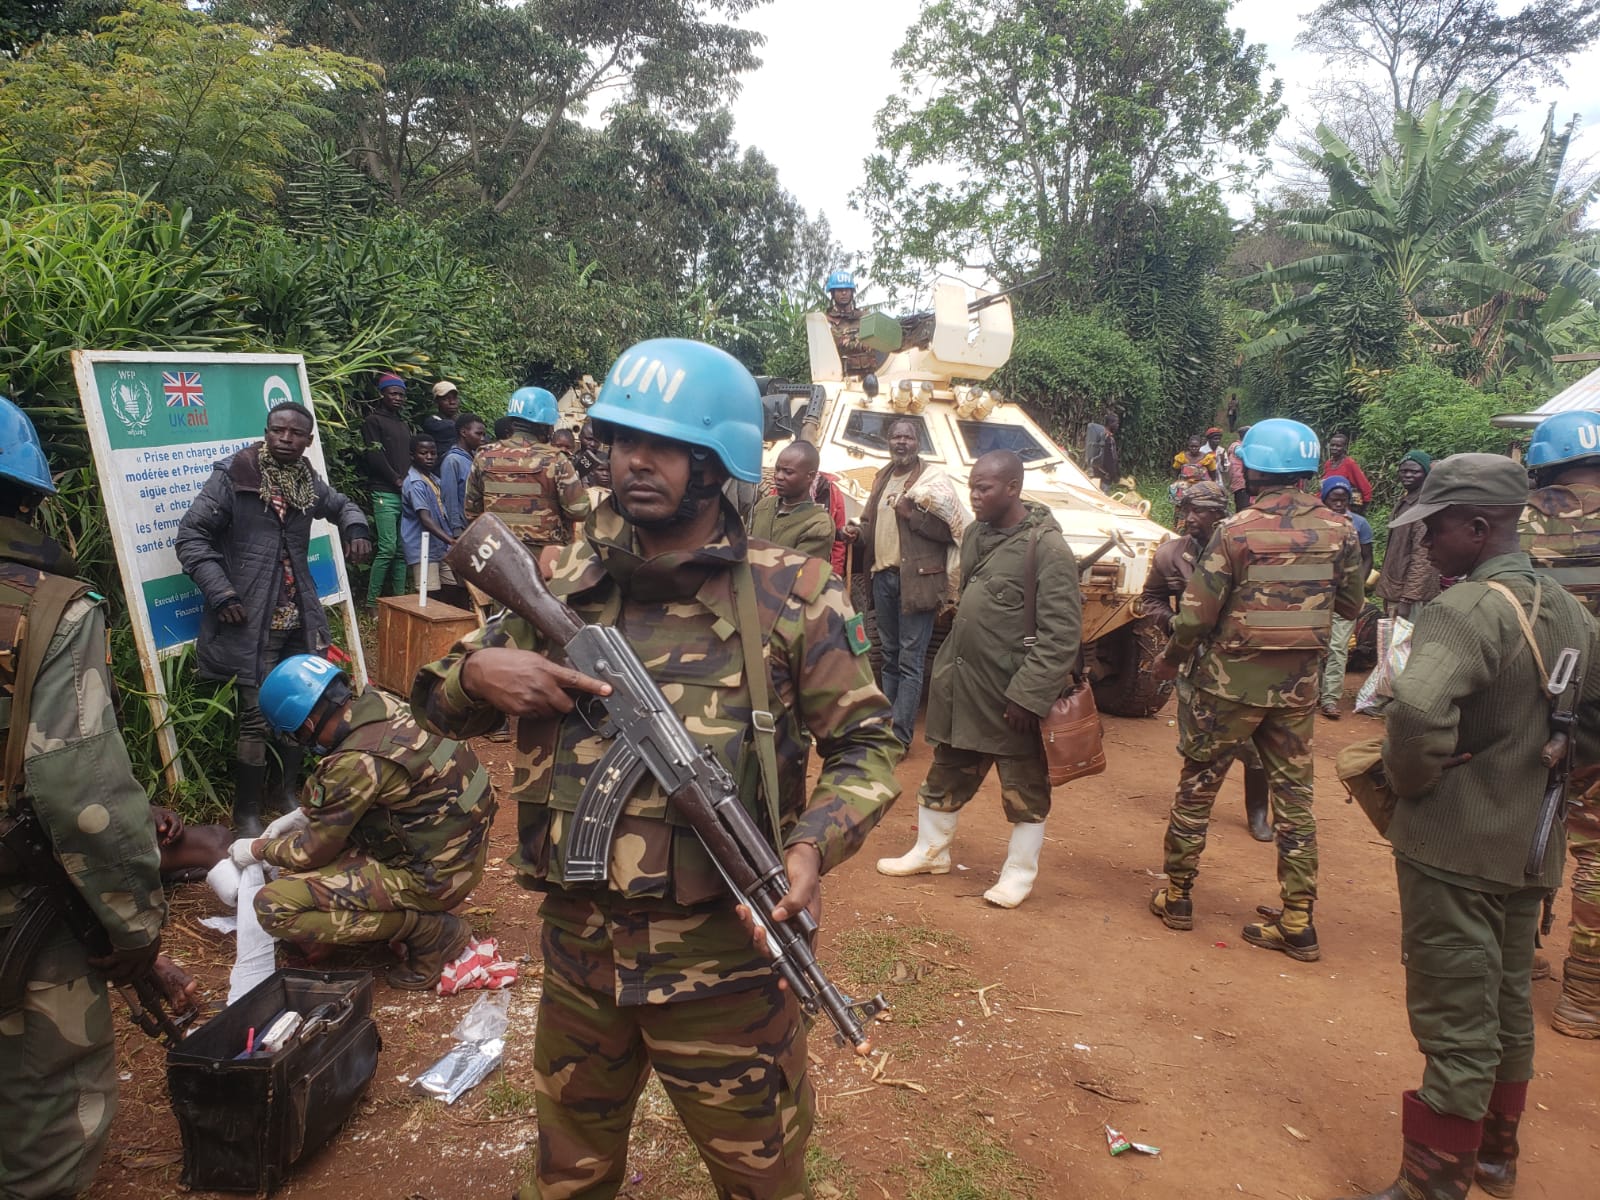 UN mission to DRC begins withdrawal by transferring control of first base of operations